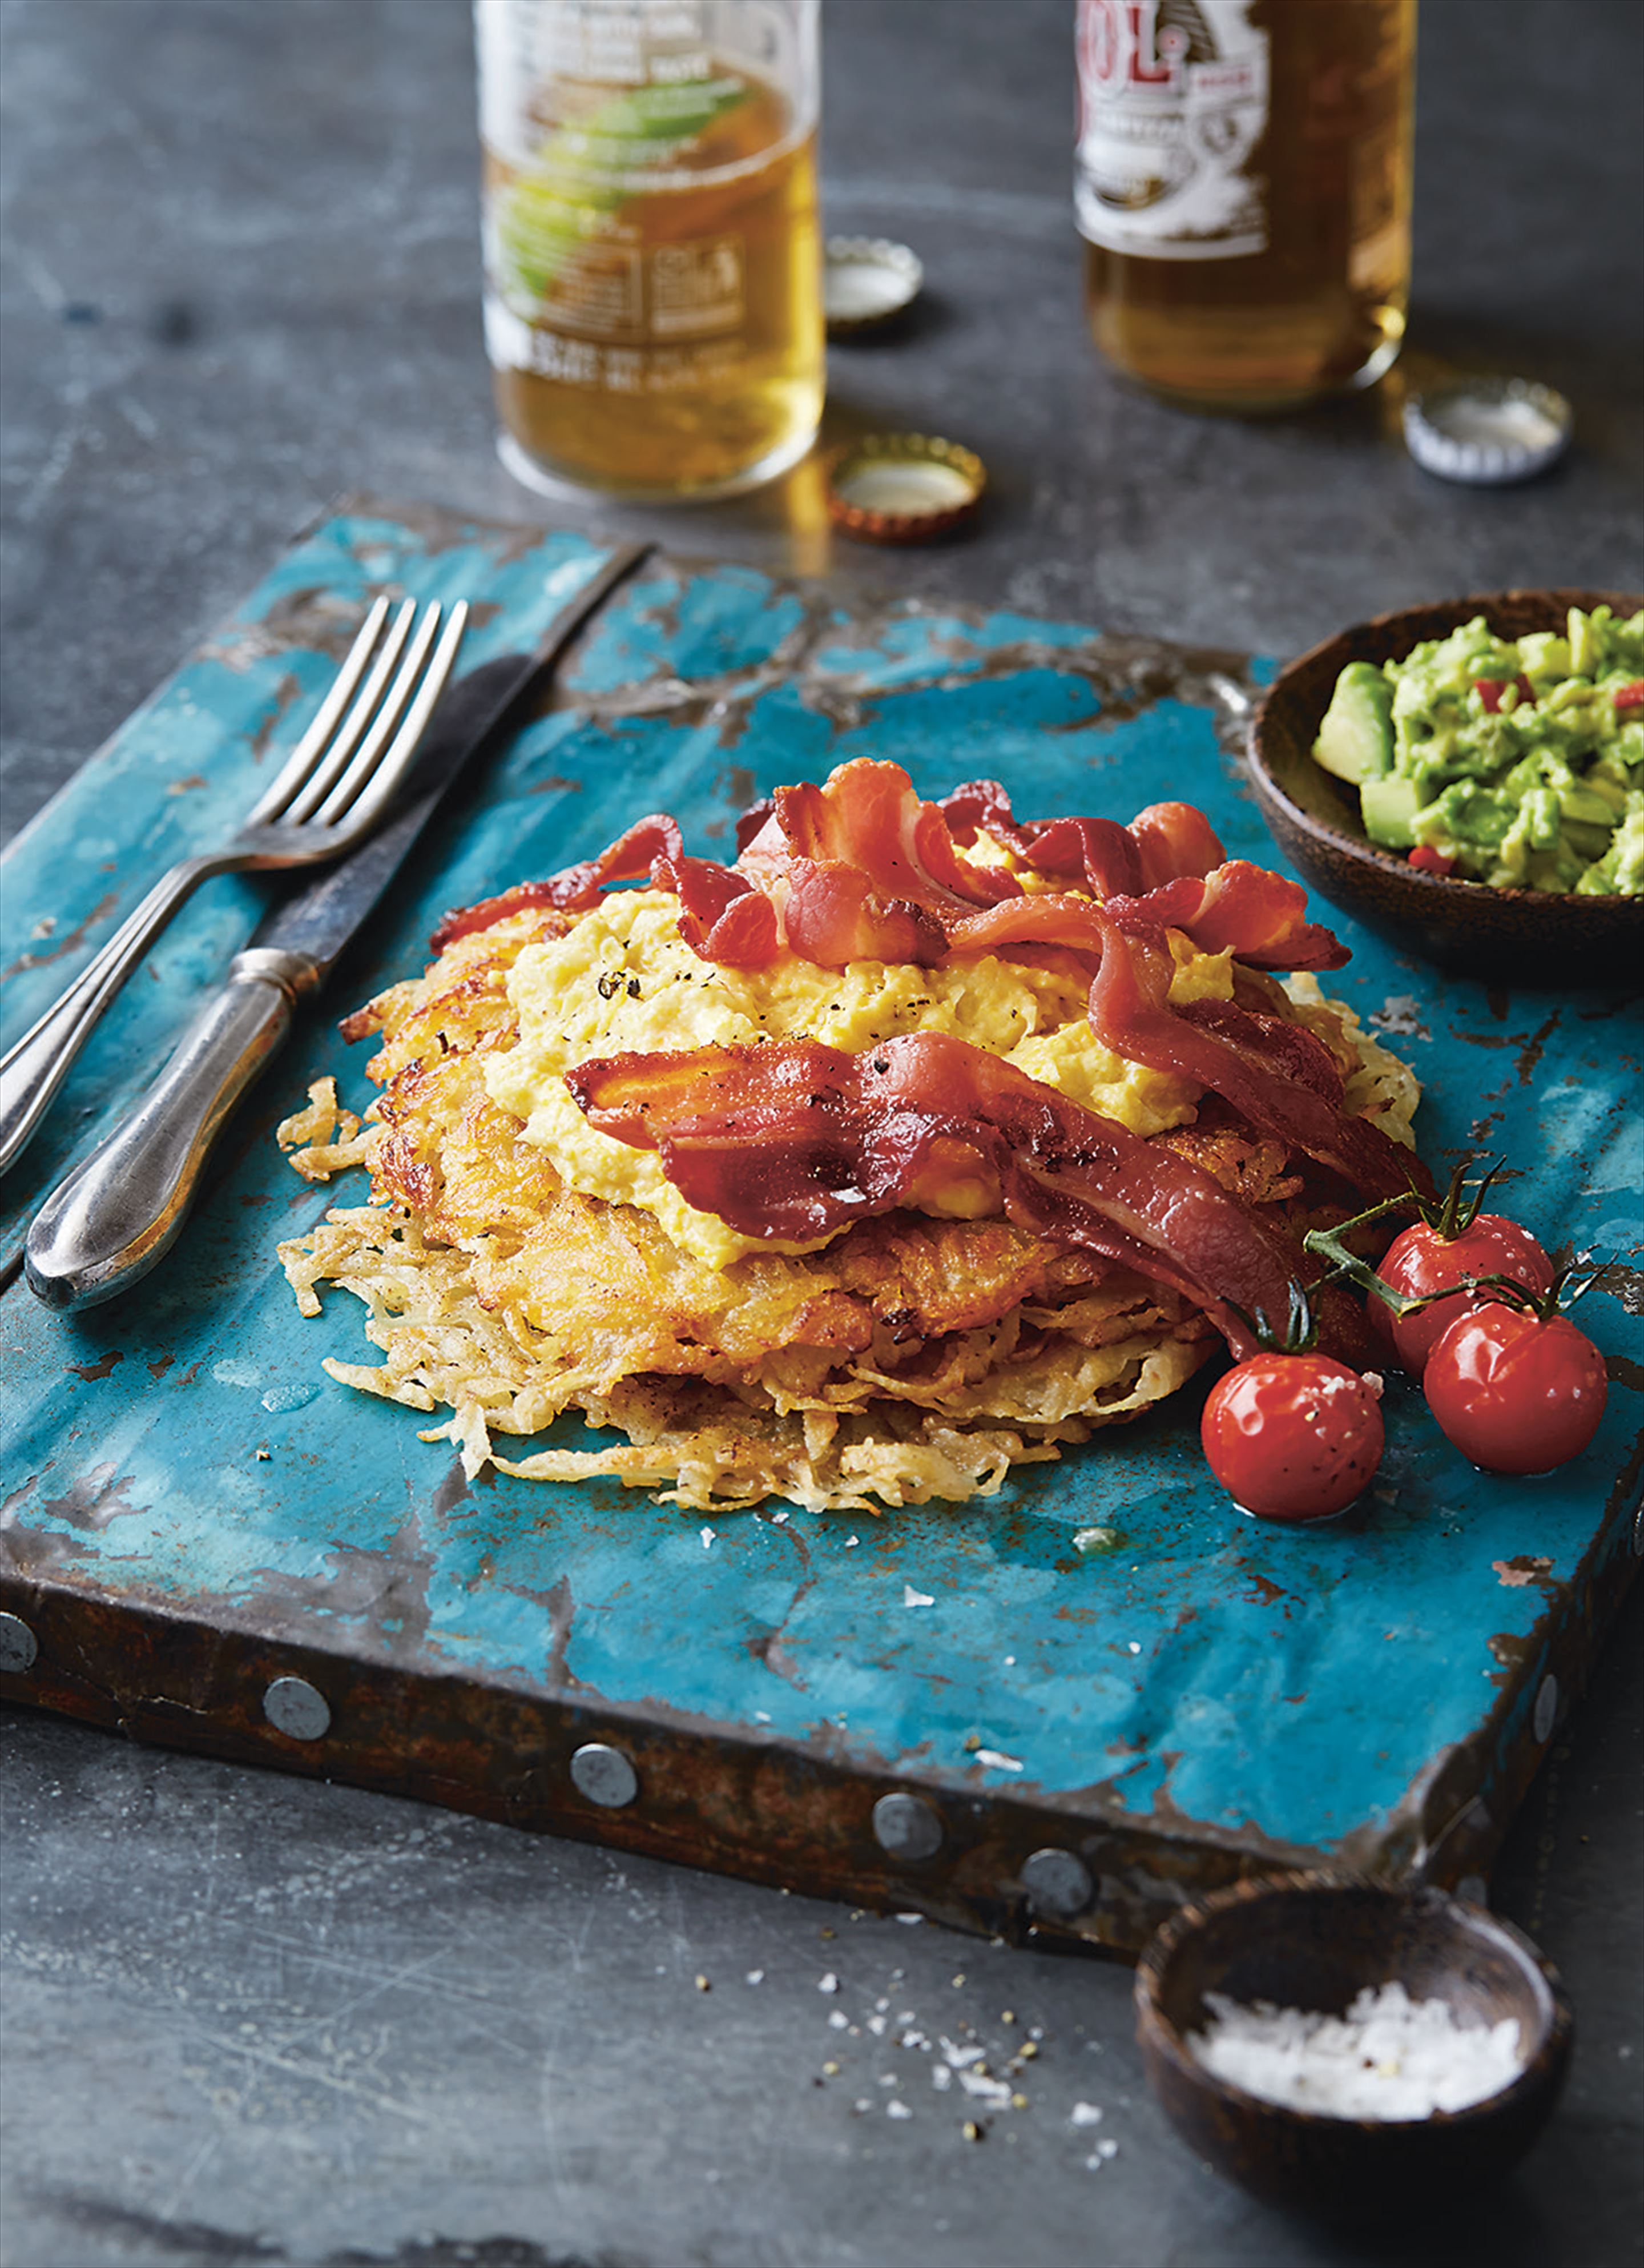 Streaky bacon with creamed corn on hash browns